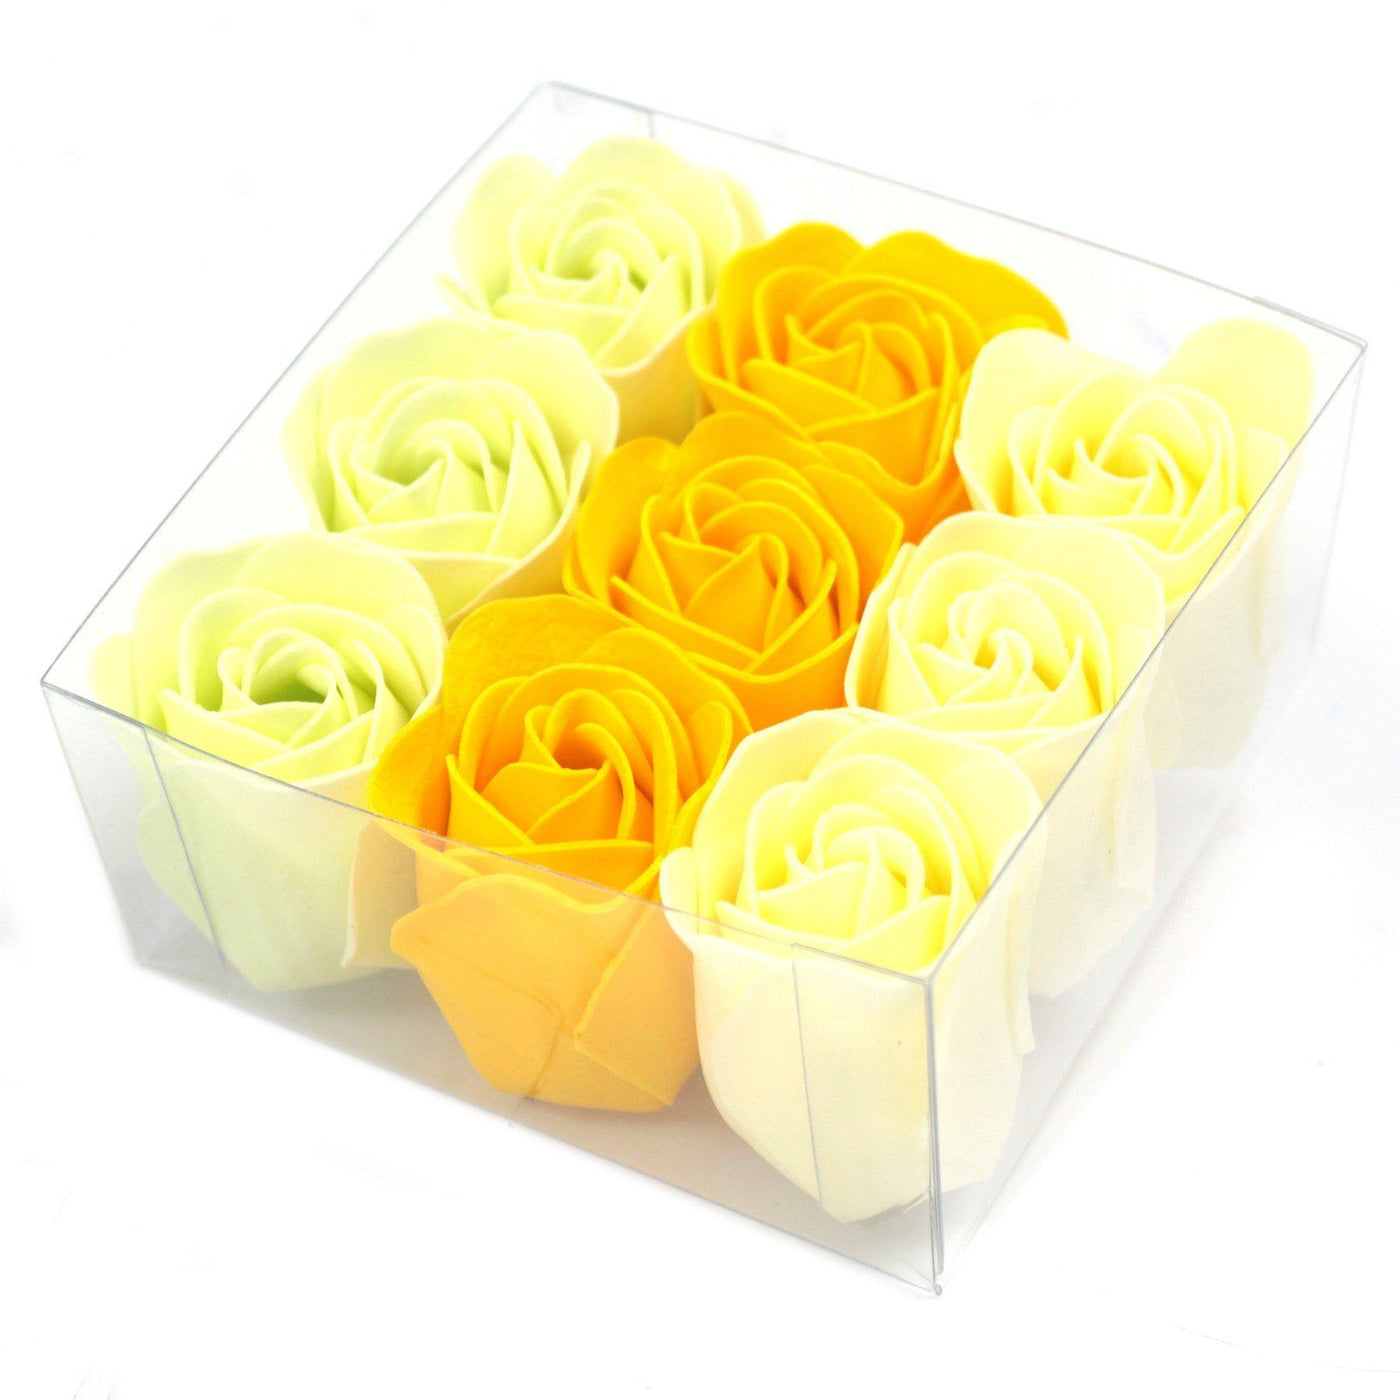 Set of 9 Luxury Soap Bath Flowers Gift Box - Yellow Spring Roses.